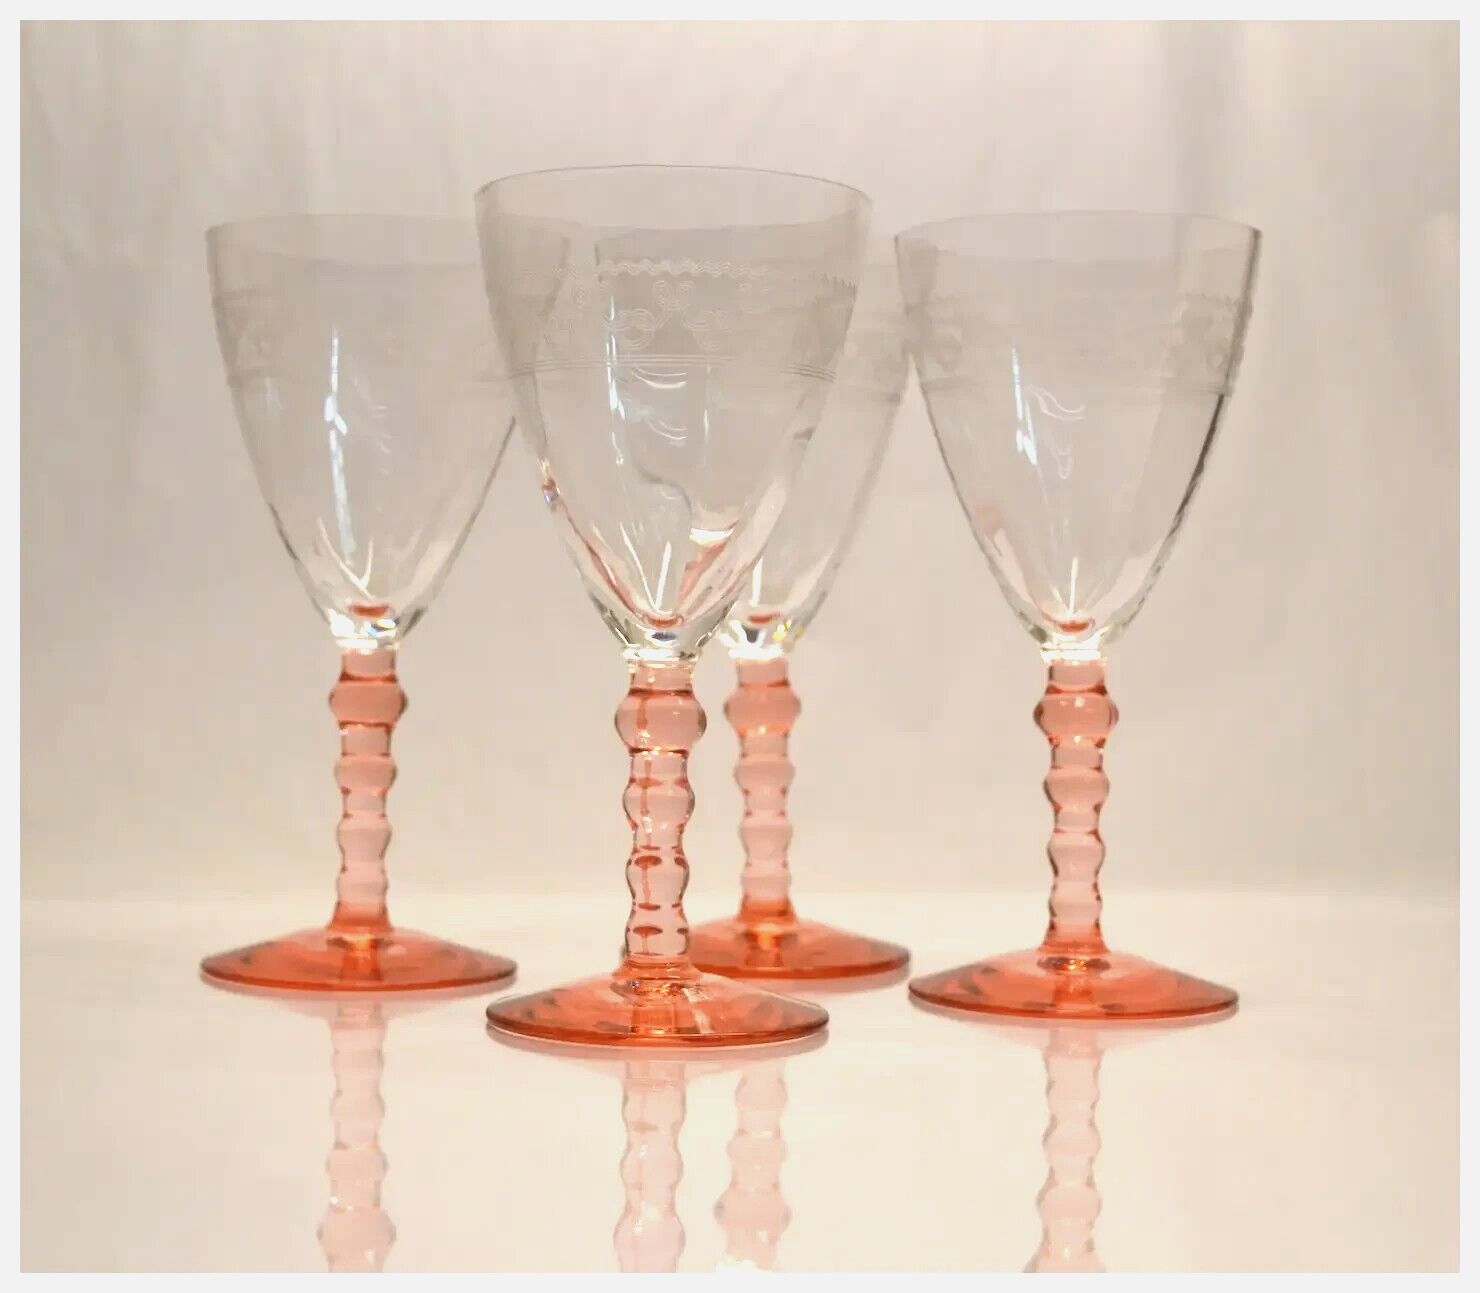 4 Vintage Pink / Clear Etched Wine Glasses / Goblets by Central Glass Works